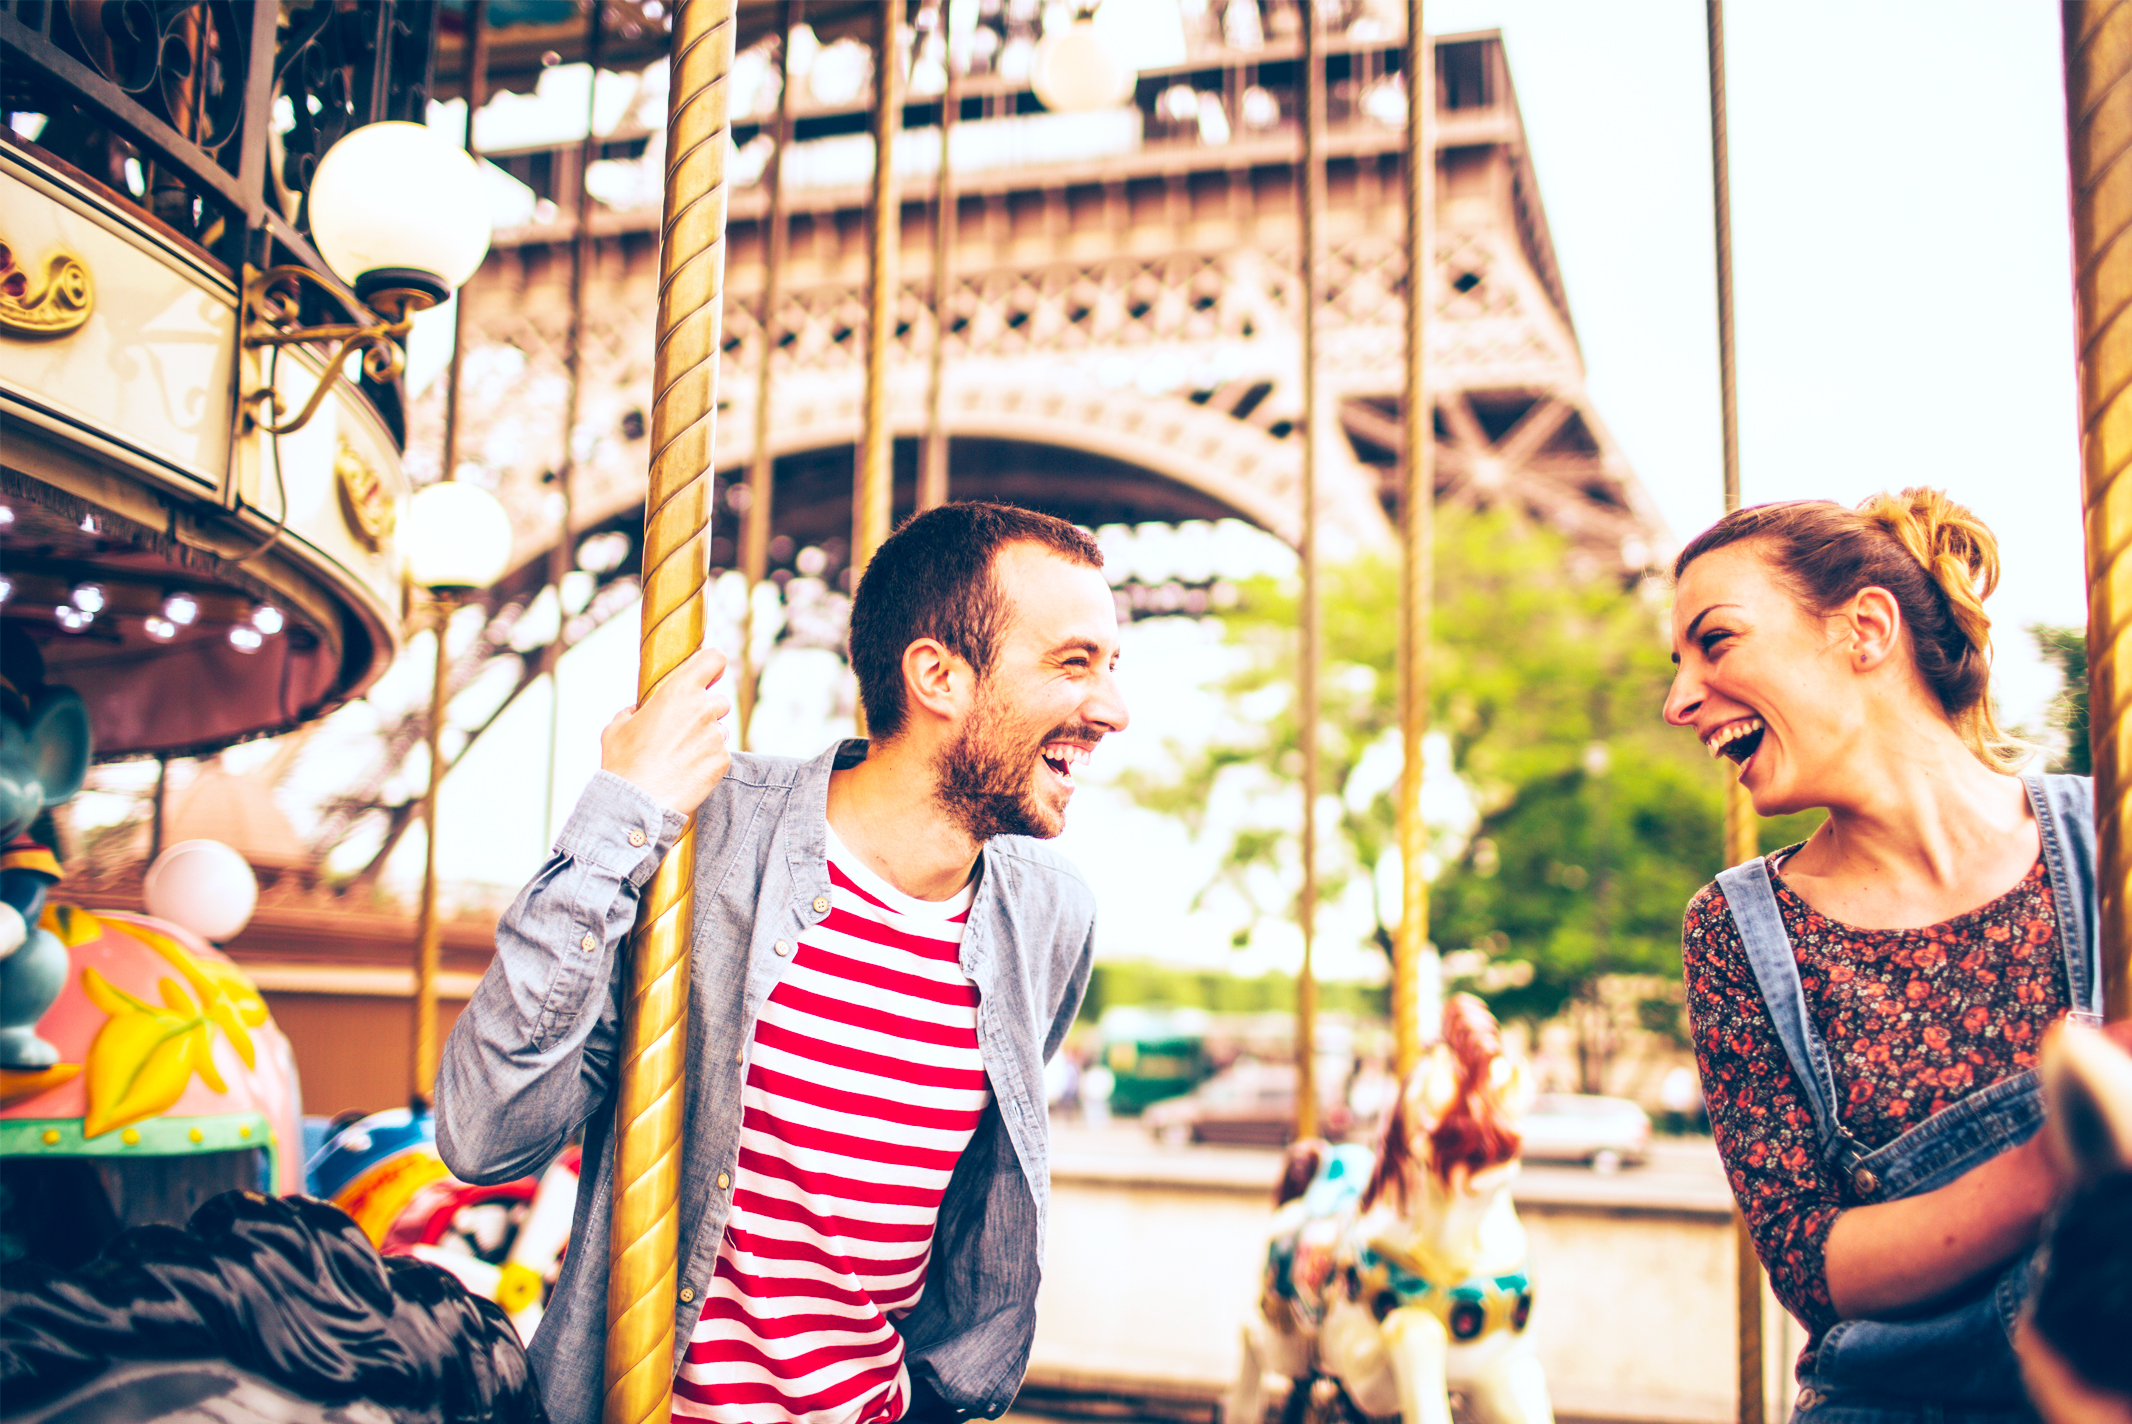 Explore France and save up to 20% when paying online